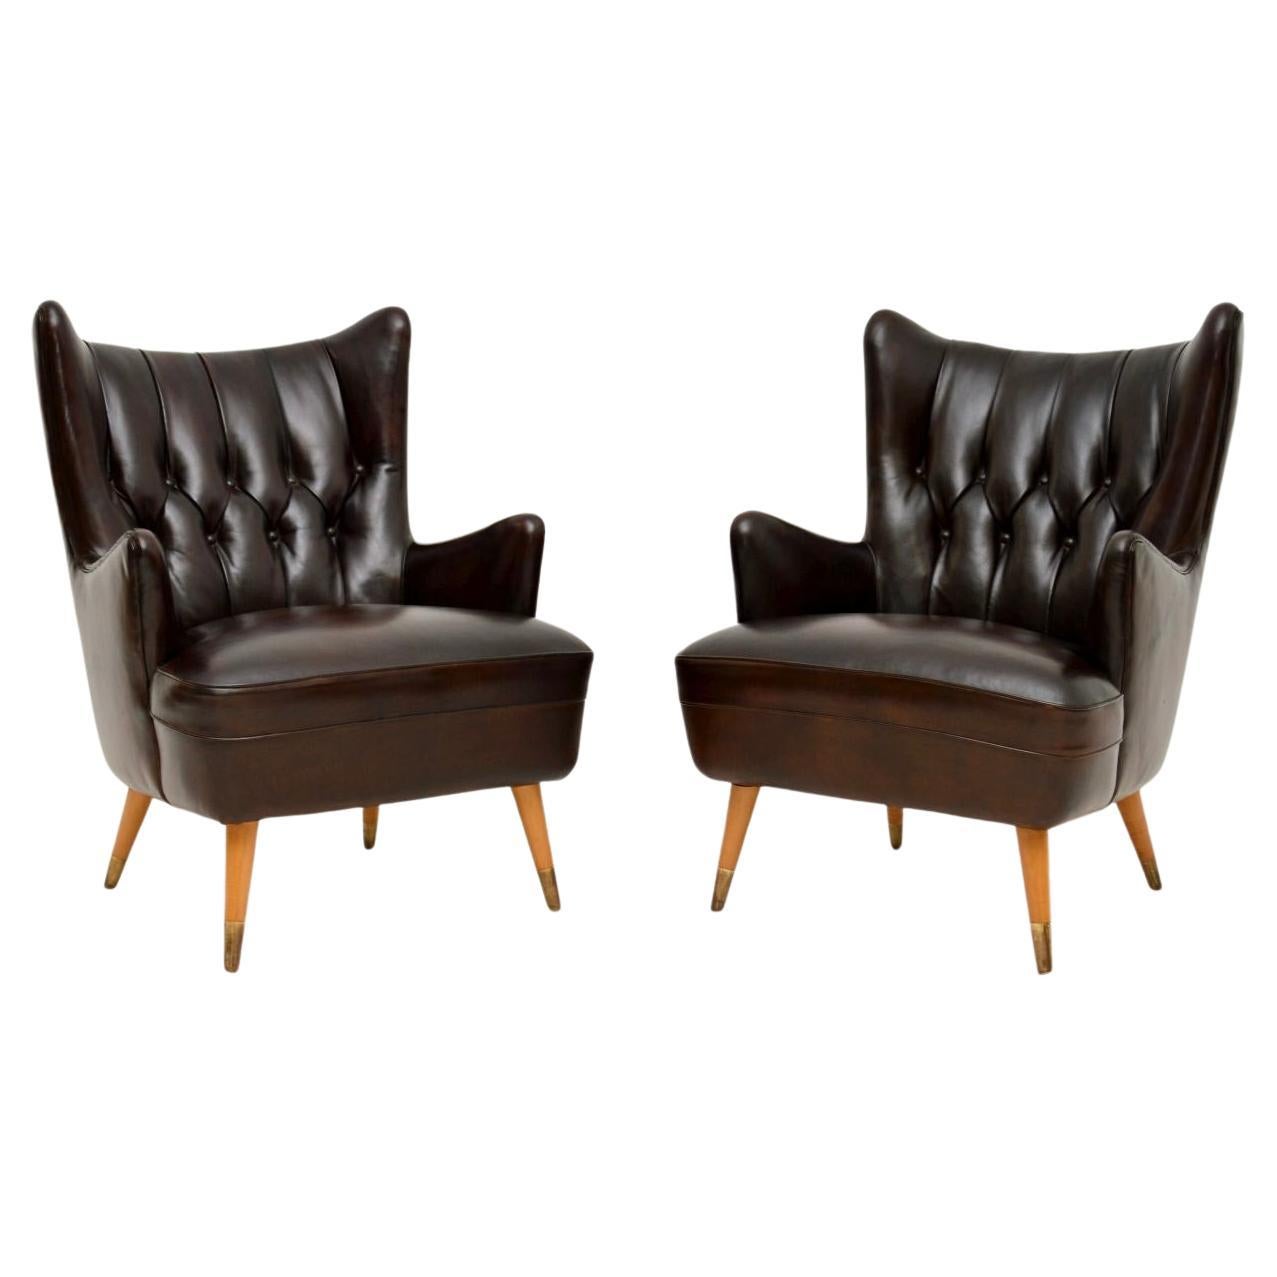 Pair of Vintage Italian Leather Wing Back Armchairs For Sale